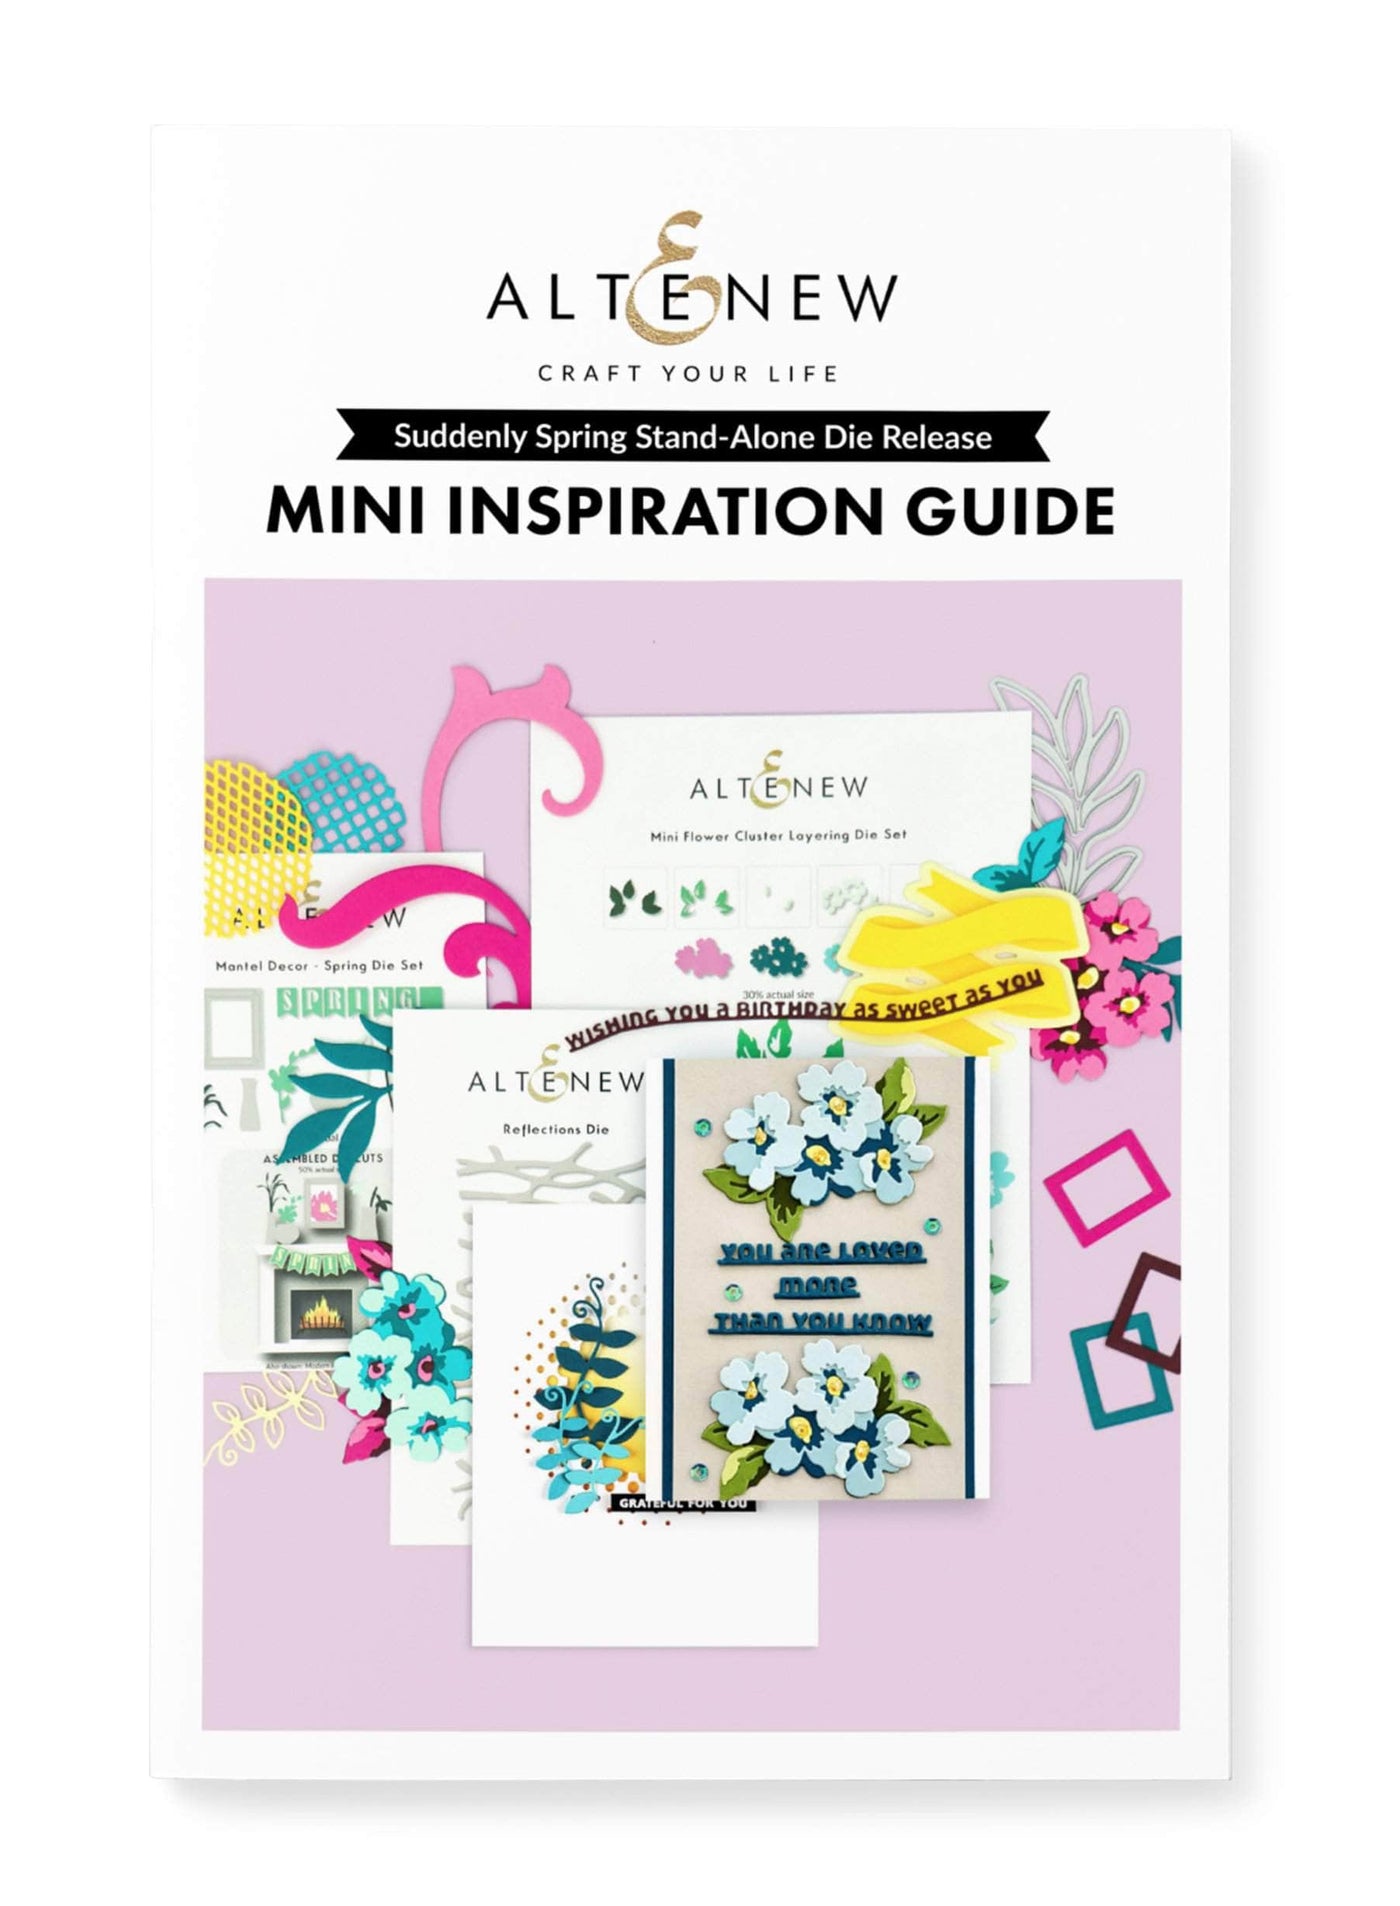 Printed Media Suddenly Spring Stand-alone Die Release Mini Inspiration Guide